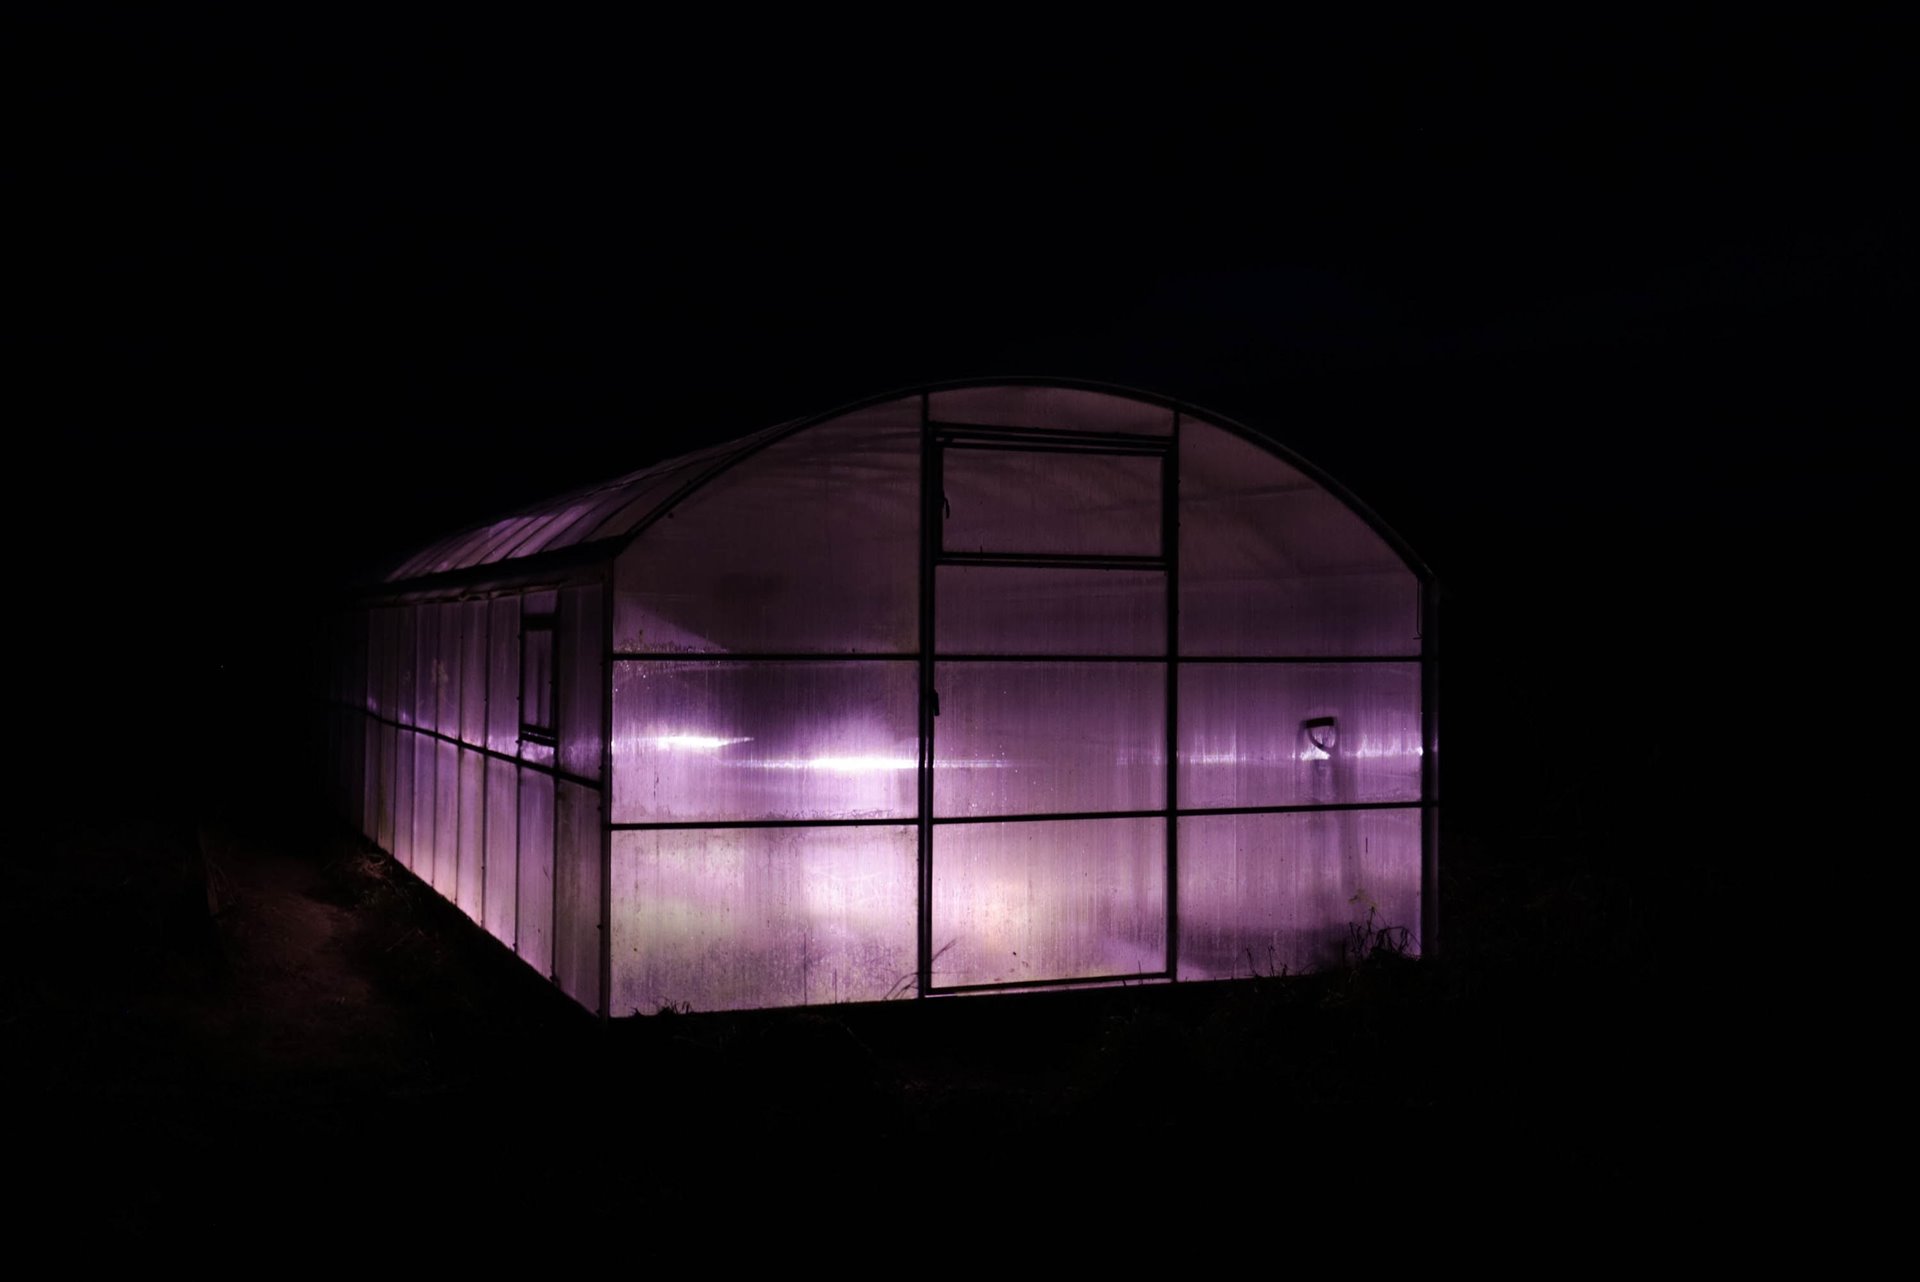 Light shines from the Svetlana village greenhouse late at night. Villagers in Svetlana grow their own vegetables.